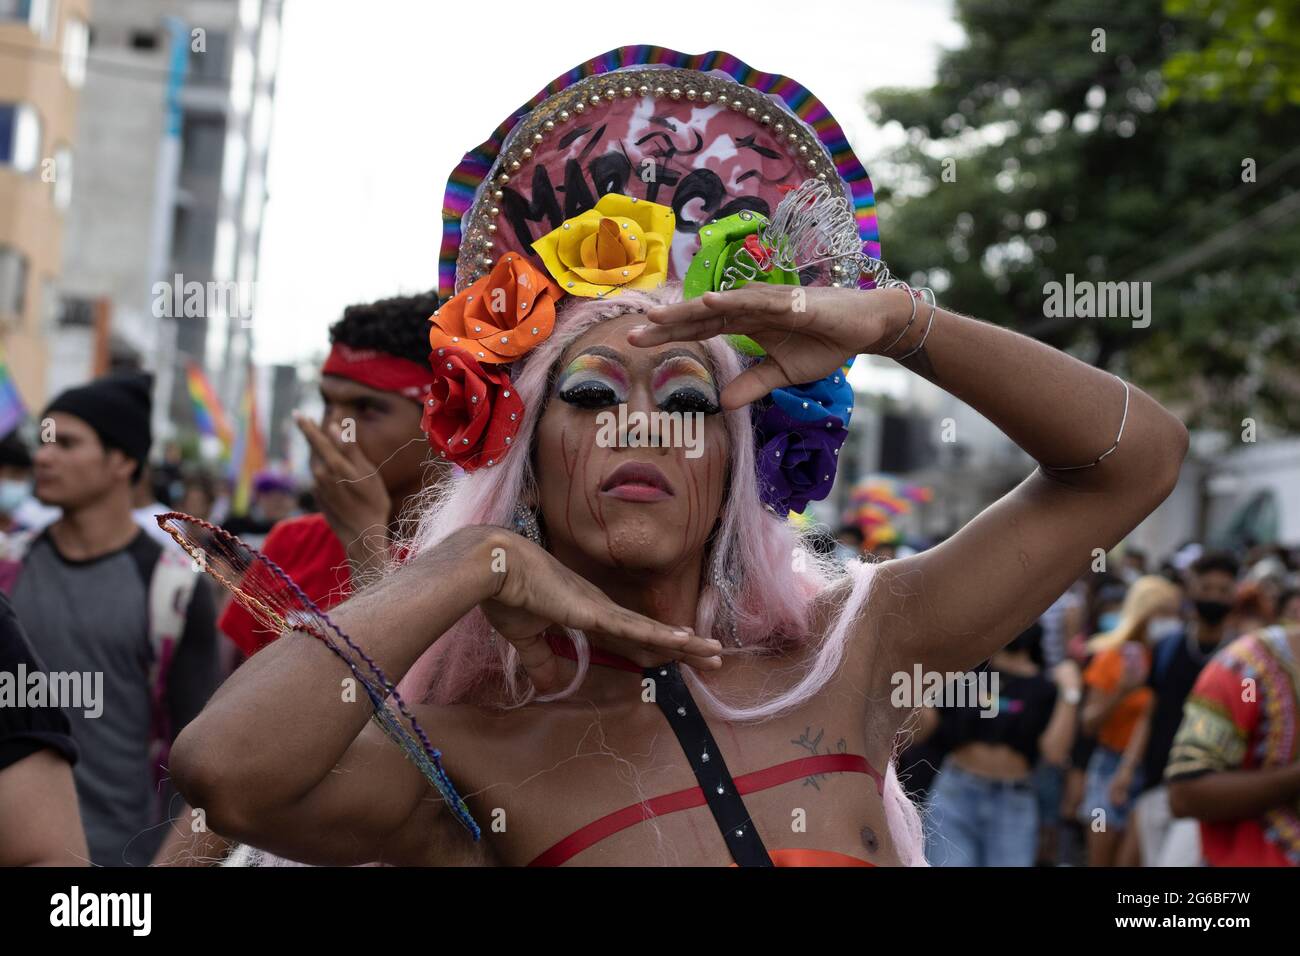 Transexual women, drag men and other members of the LGTBIQ community demonstrate as thousands of members of Barranquilla, Colombia LGTBIQ communities participate in the international pride parade celebrated on June 26, 2021. Stock Photo